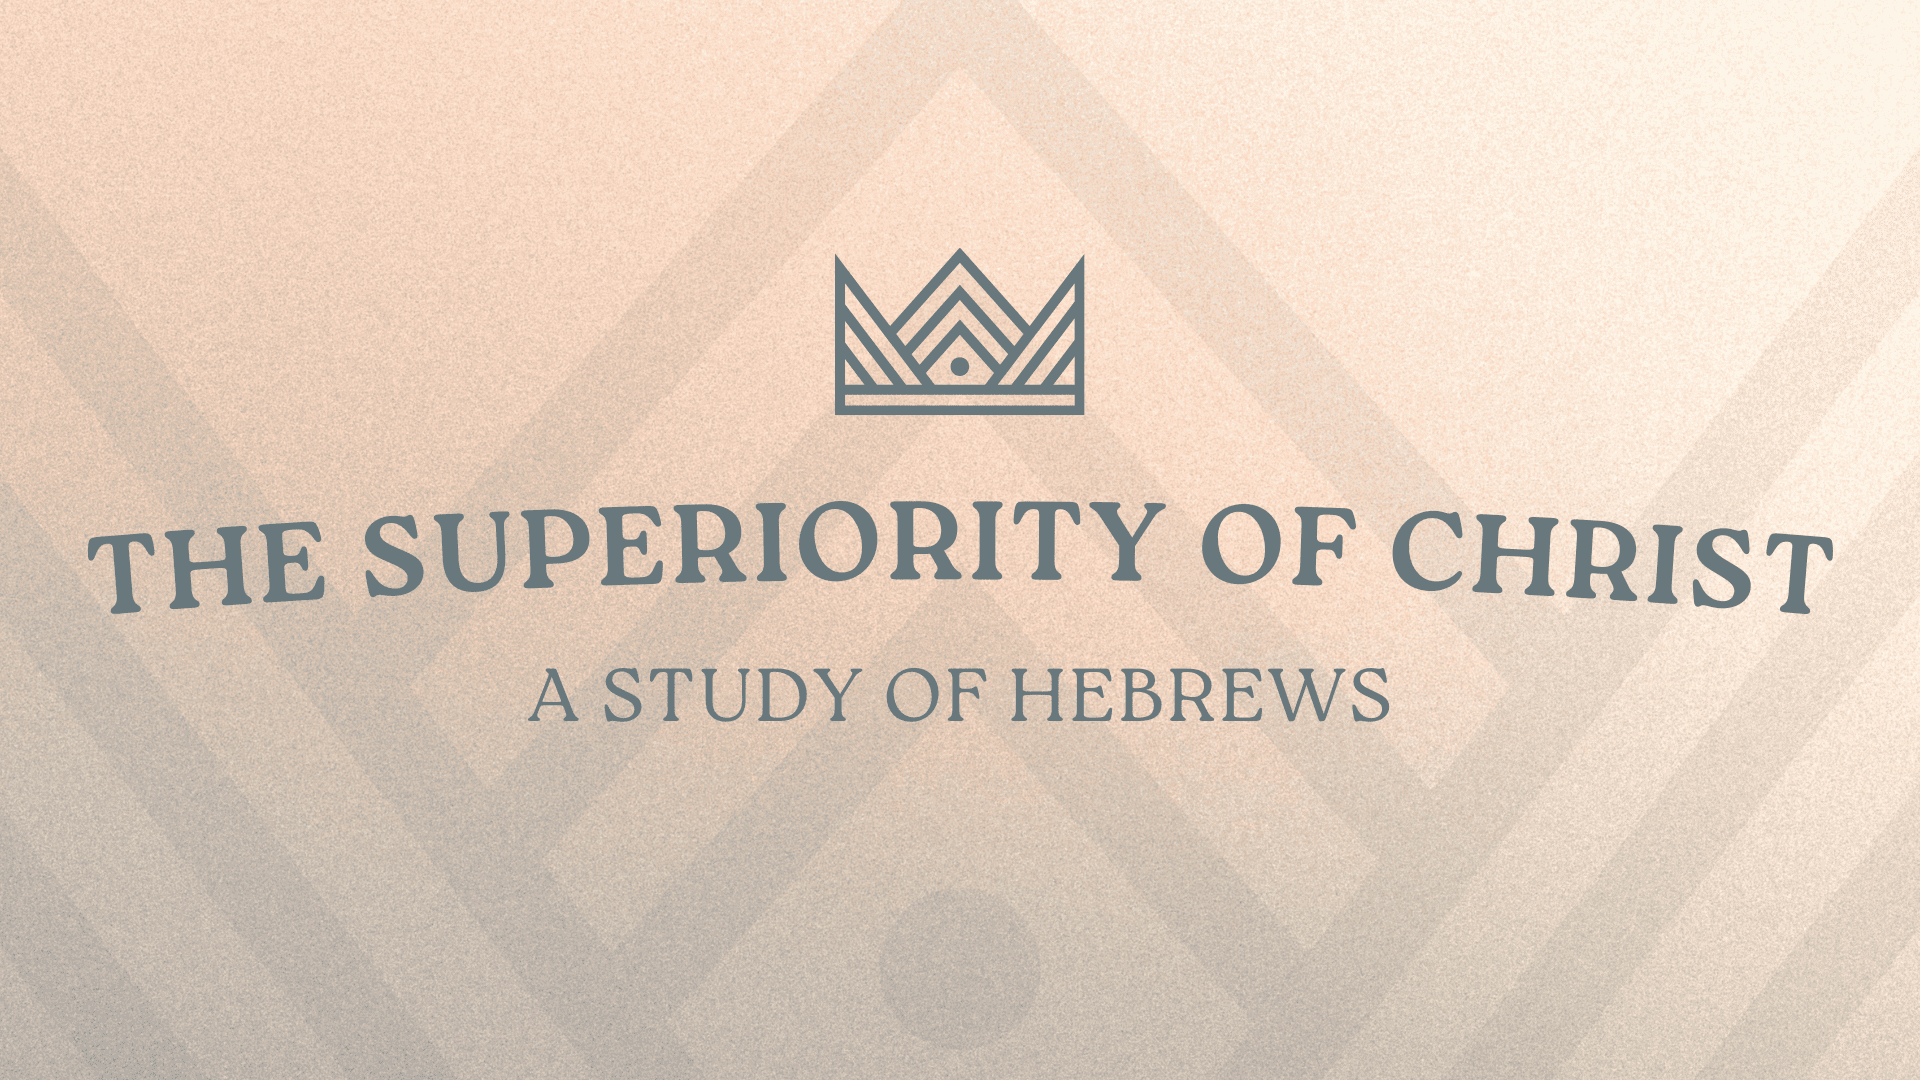 Superiority of Christ image